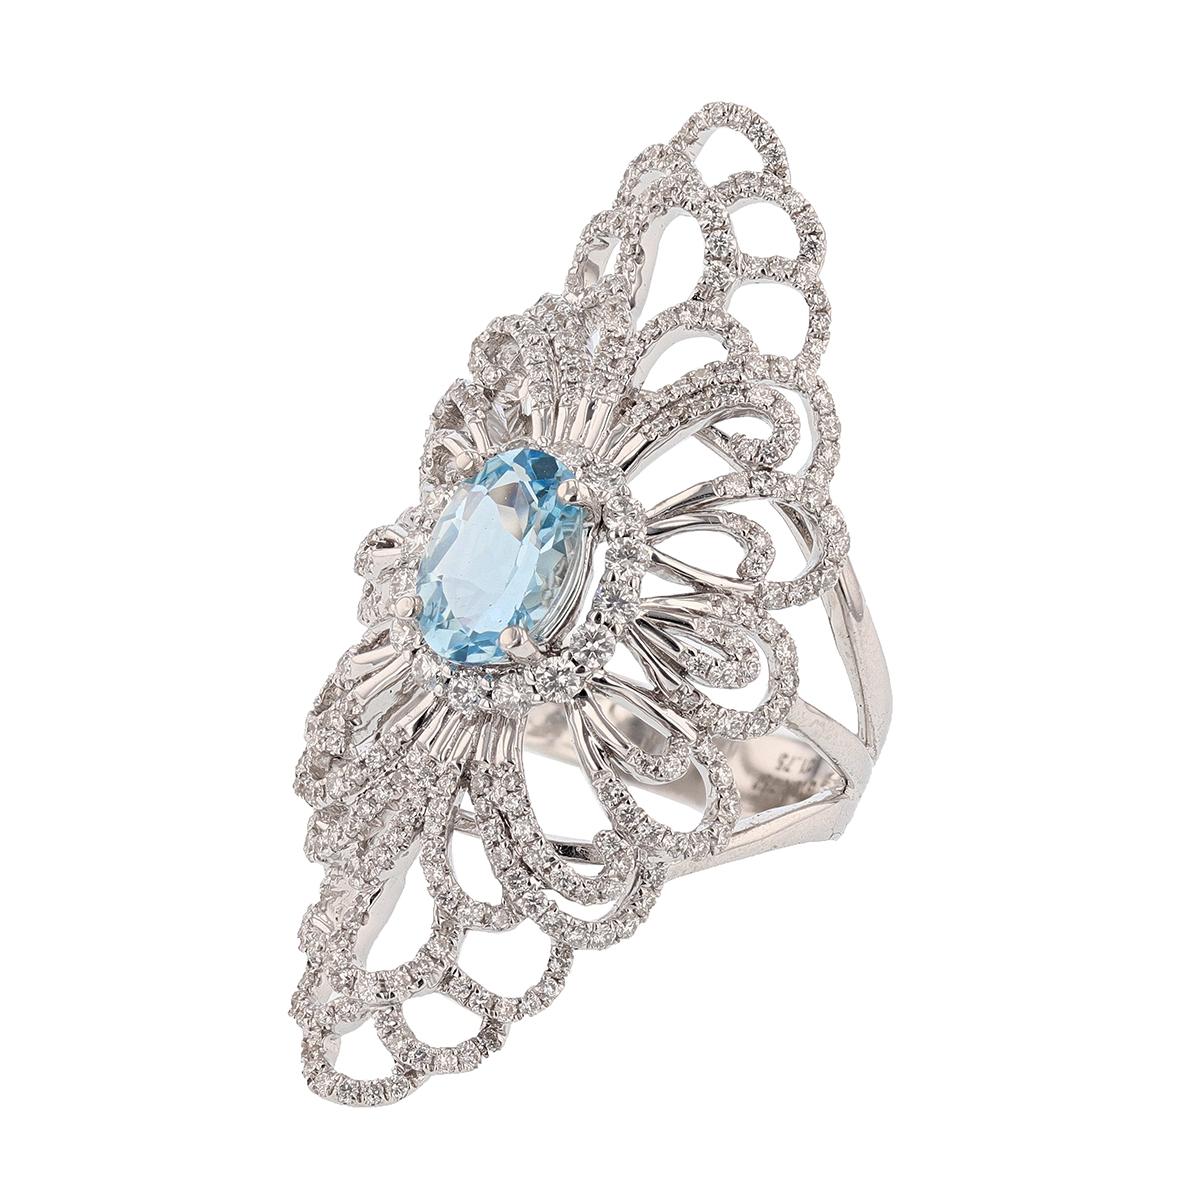 This ring is set in 18 karat white gold. The center stone is an oval cut Aquamarine weighing 1.50 carats and is prong set. The mounting features 286 round cut diamonds weighing 1.75cts.